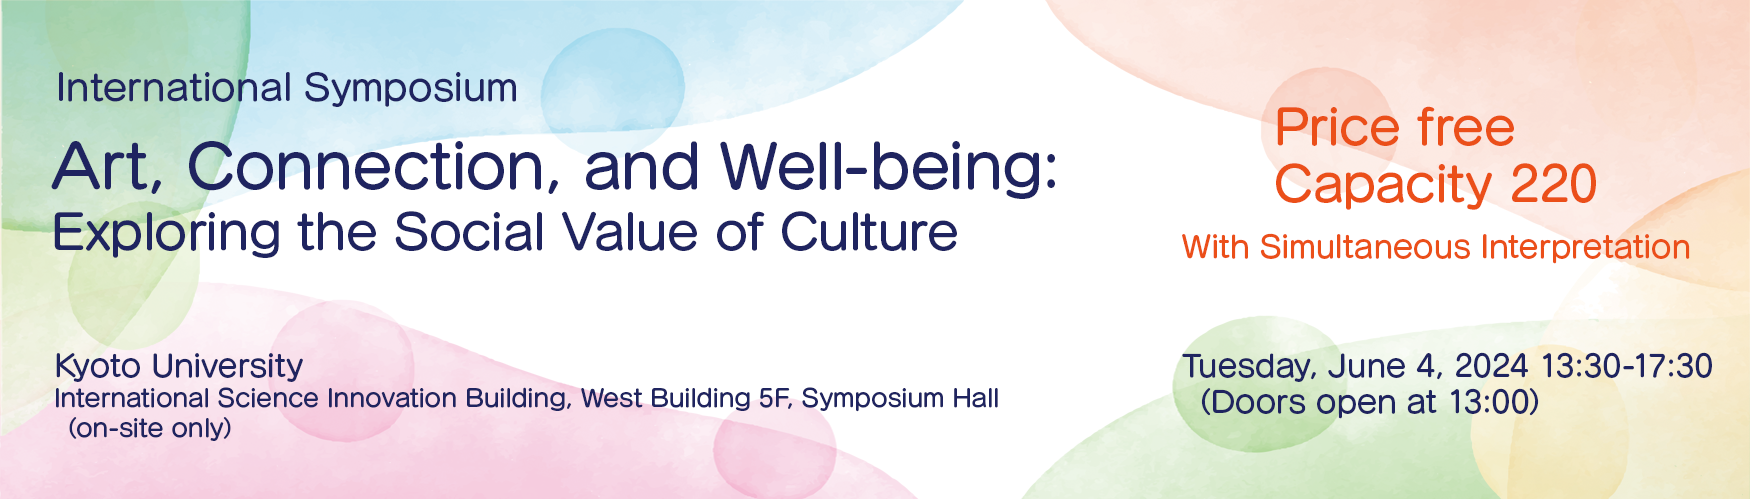 Art, Connection, and Well-being:
Exploring the Social Value of Culture
Tuesday, June 4, 2024 13:30-17:15 *Doors open at 13:00
Price free Capacity 220